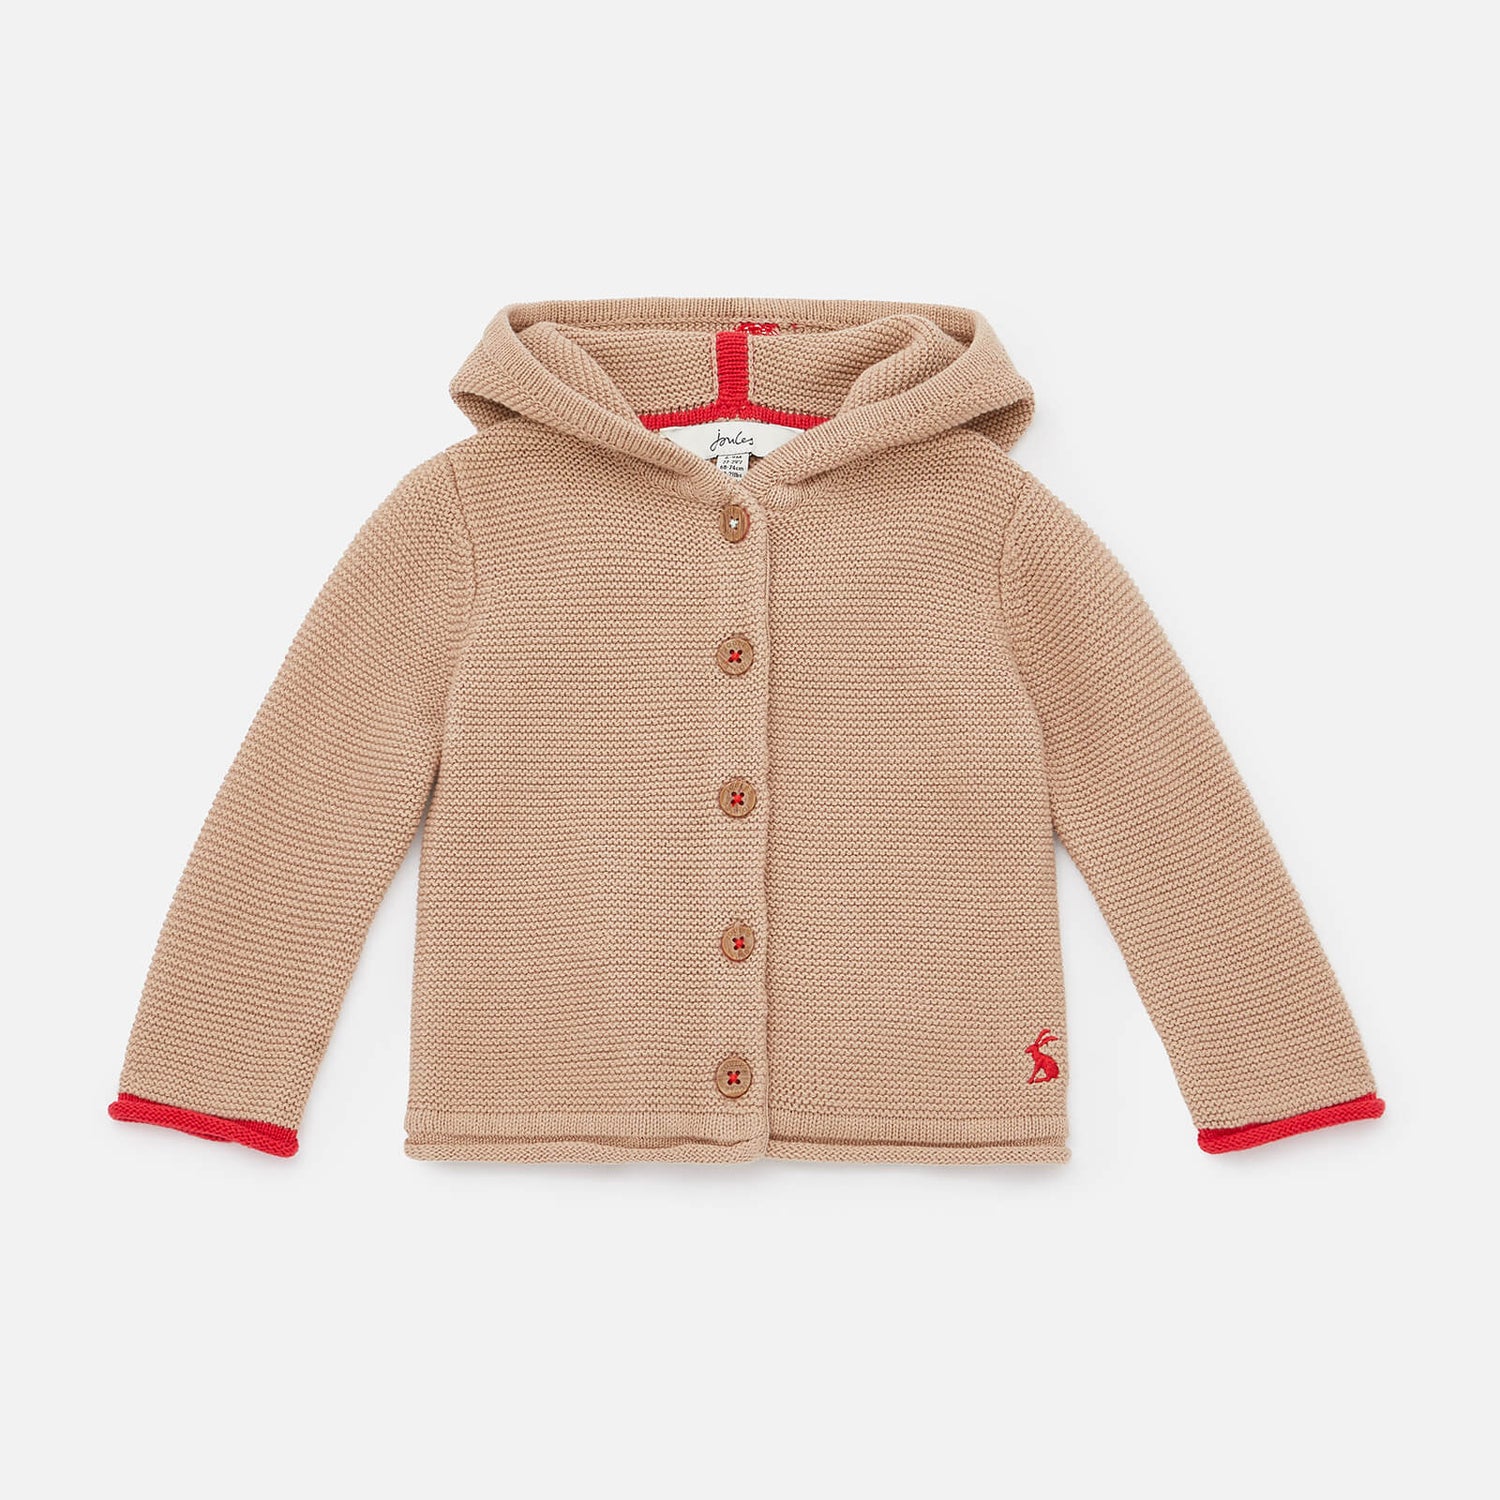 Joules Babies' Alby Hooded Cardigan - 3-6 months